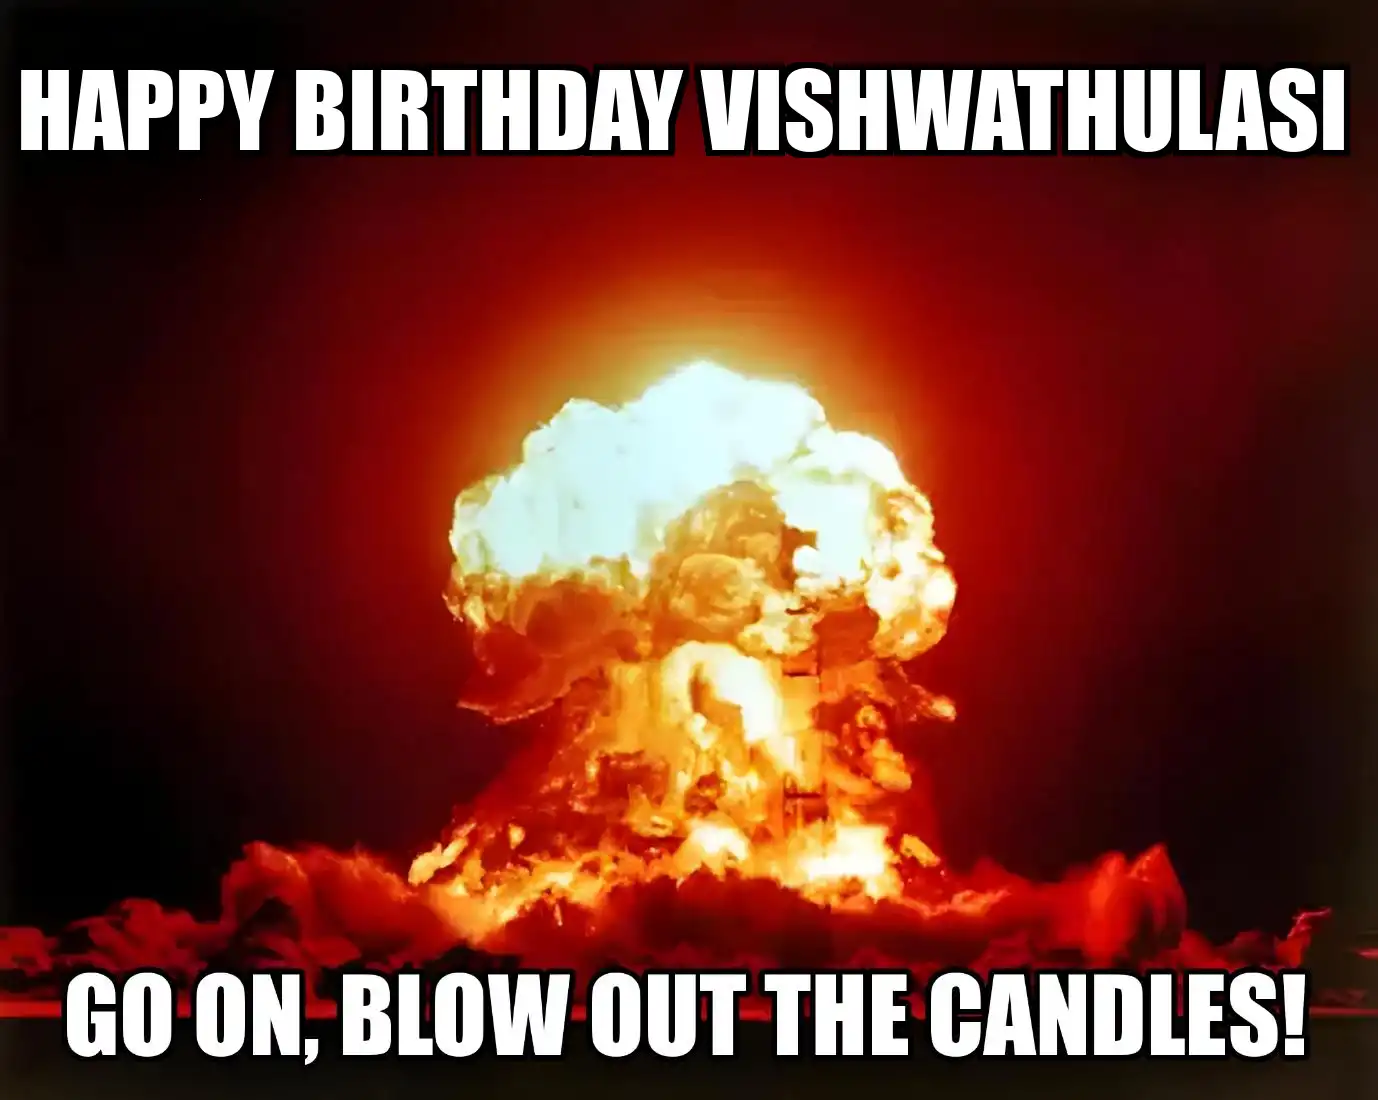 Happy Birthday Vishwathulasi Go On Blow Out The Candles Meme